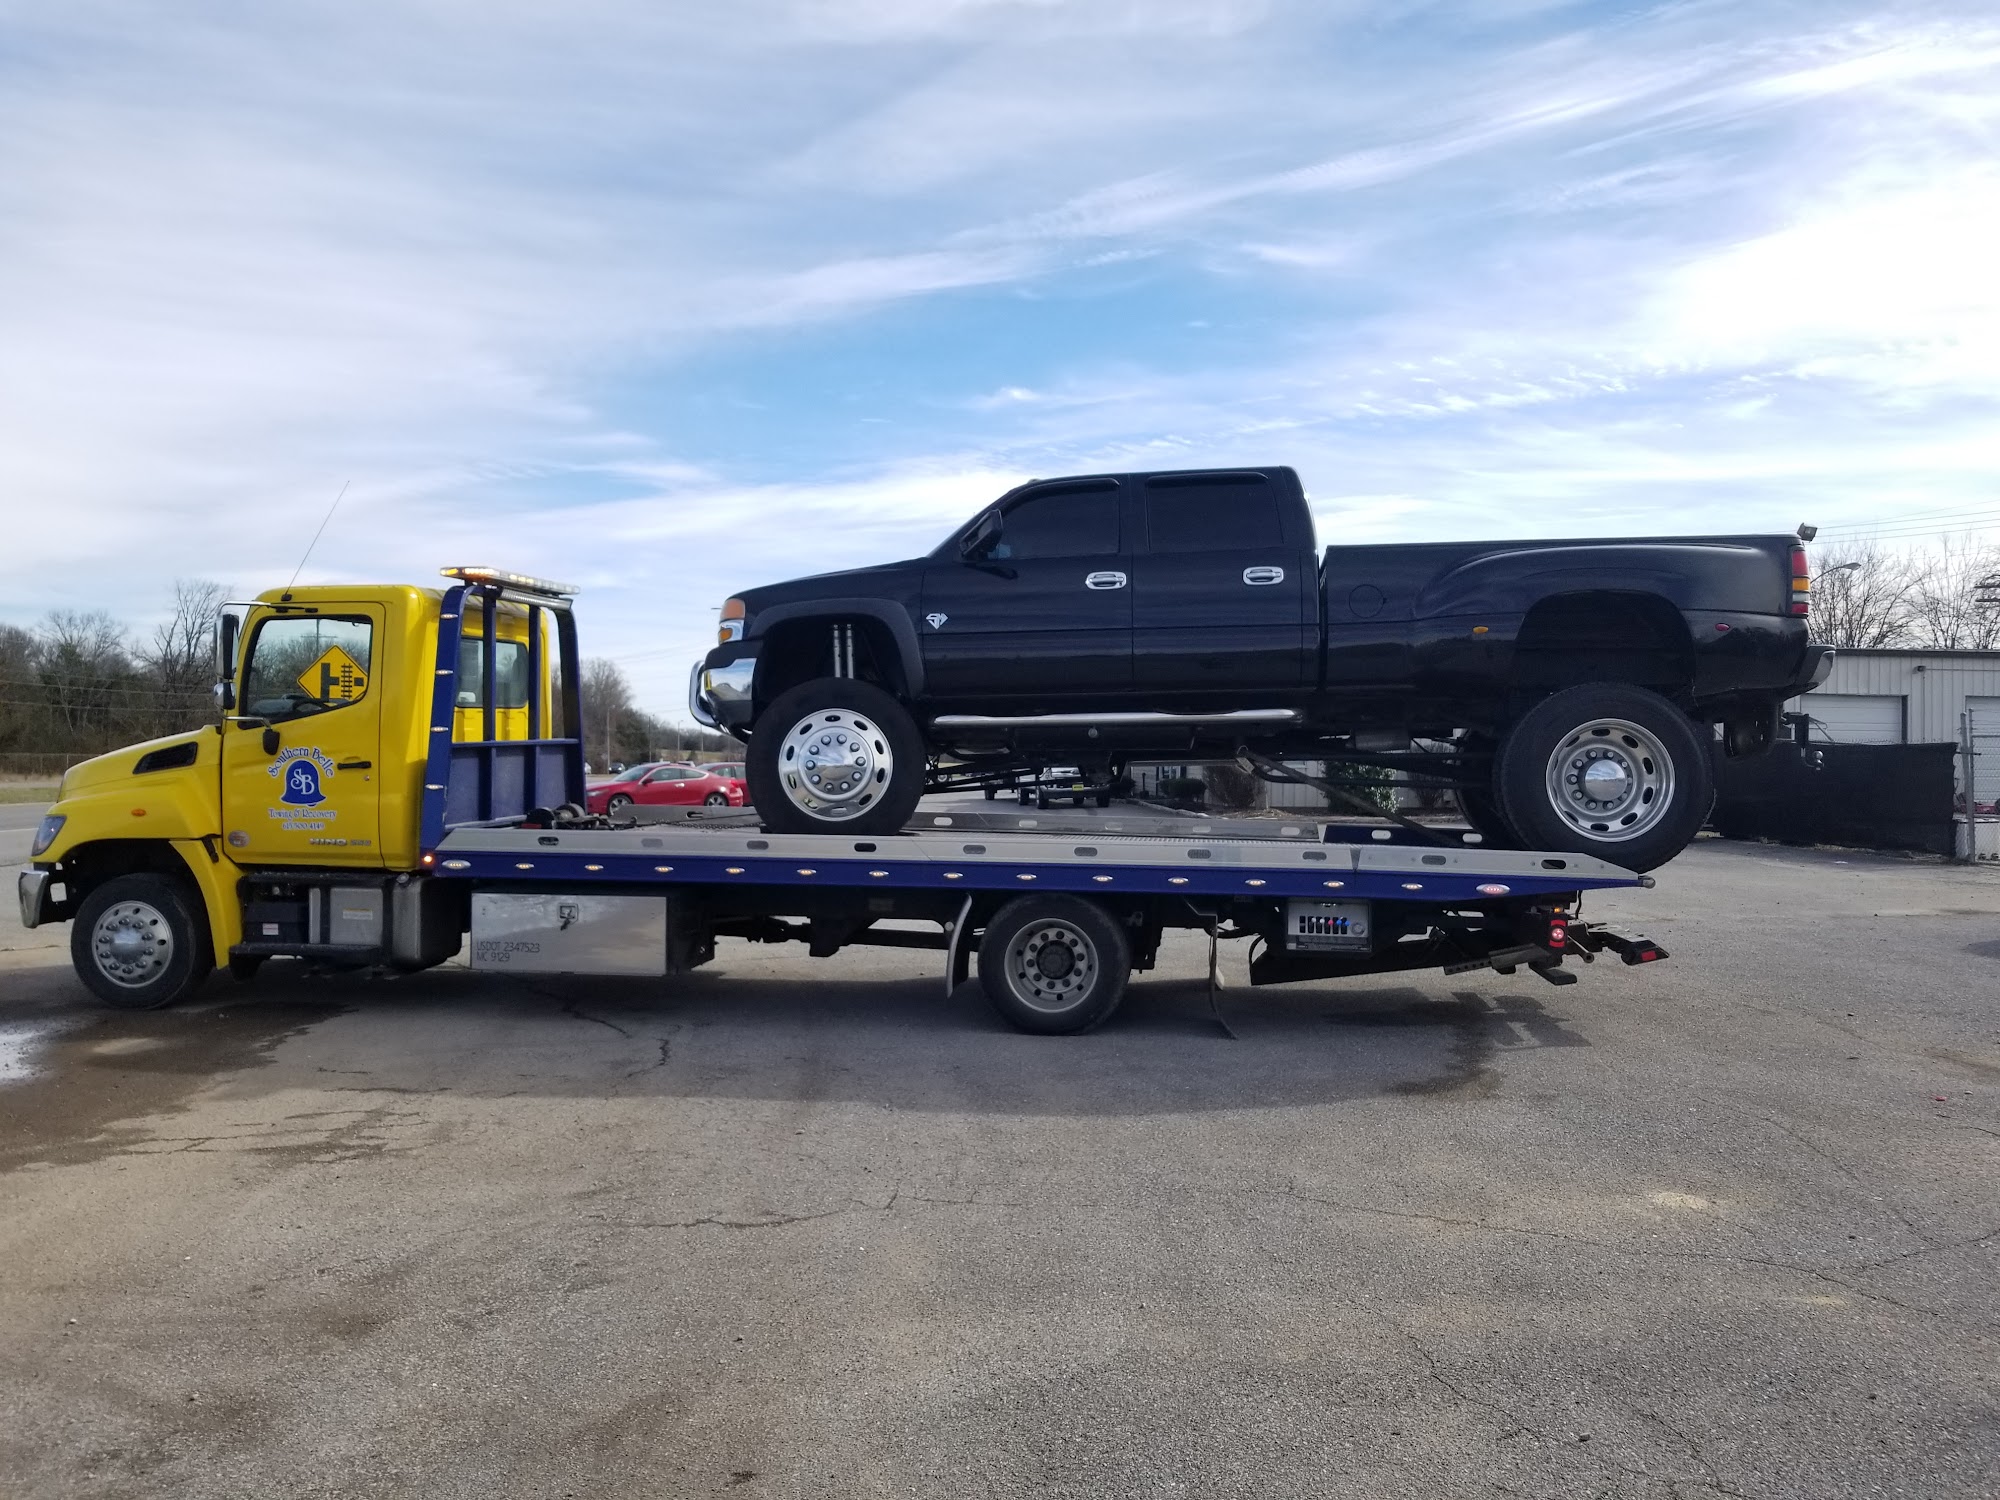 Southern Belle Towing & Recovery